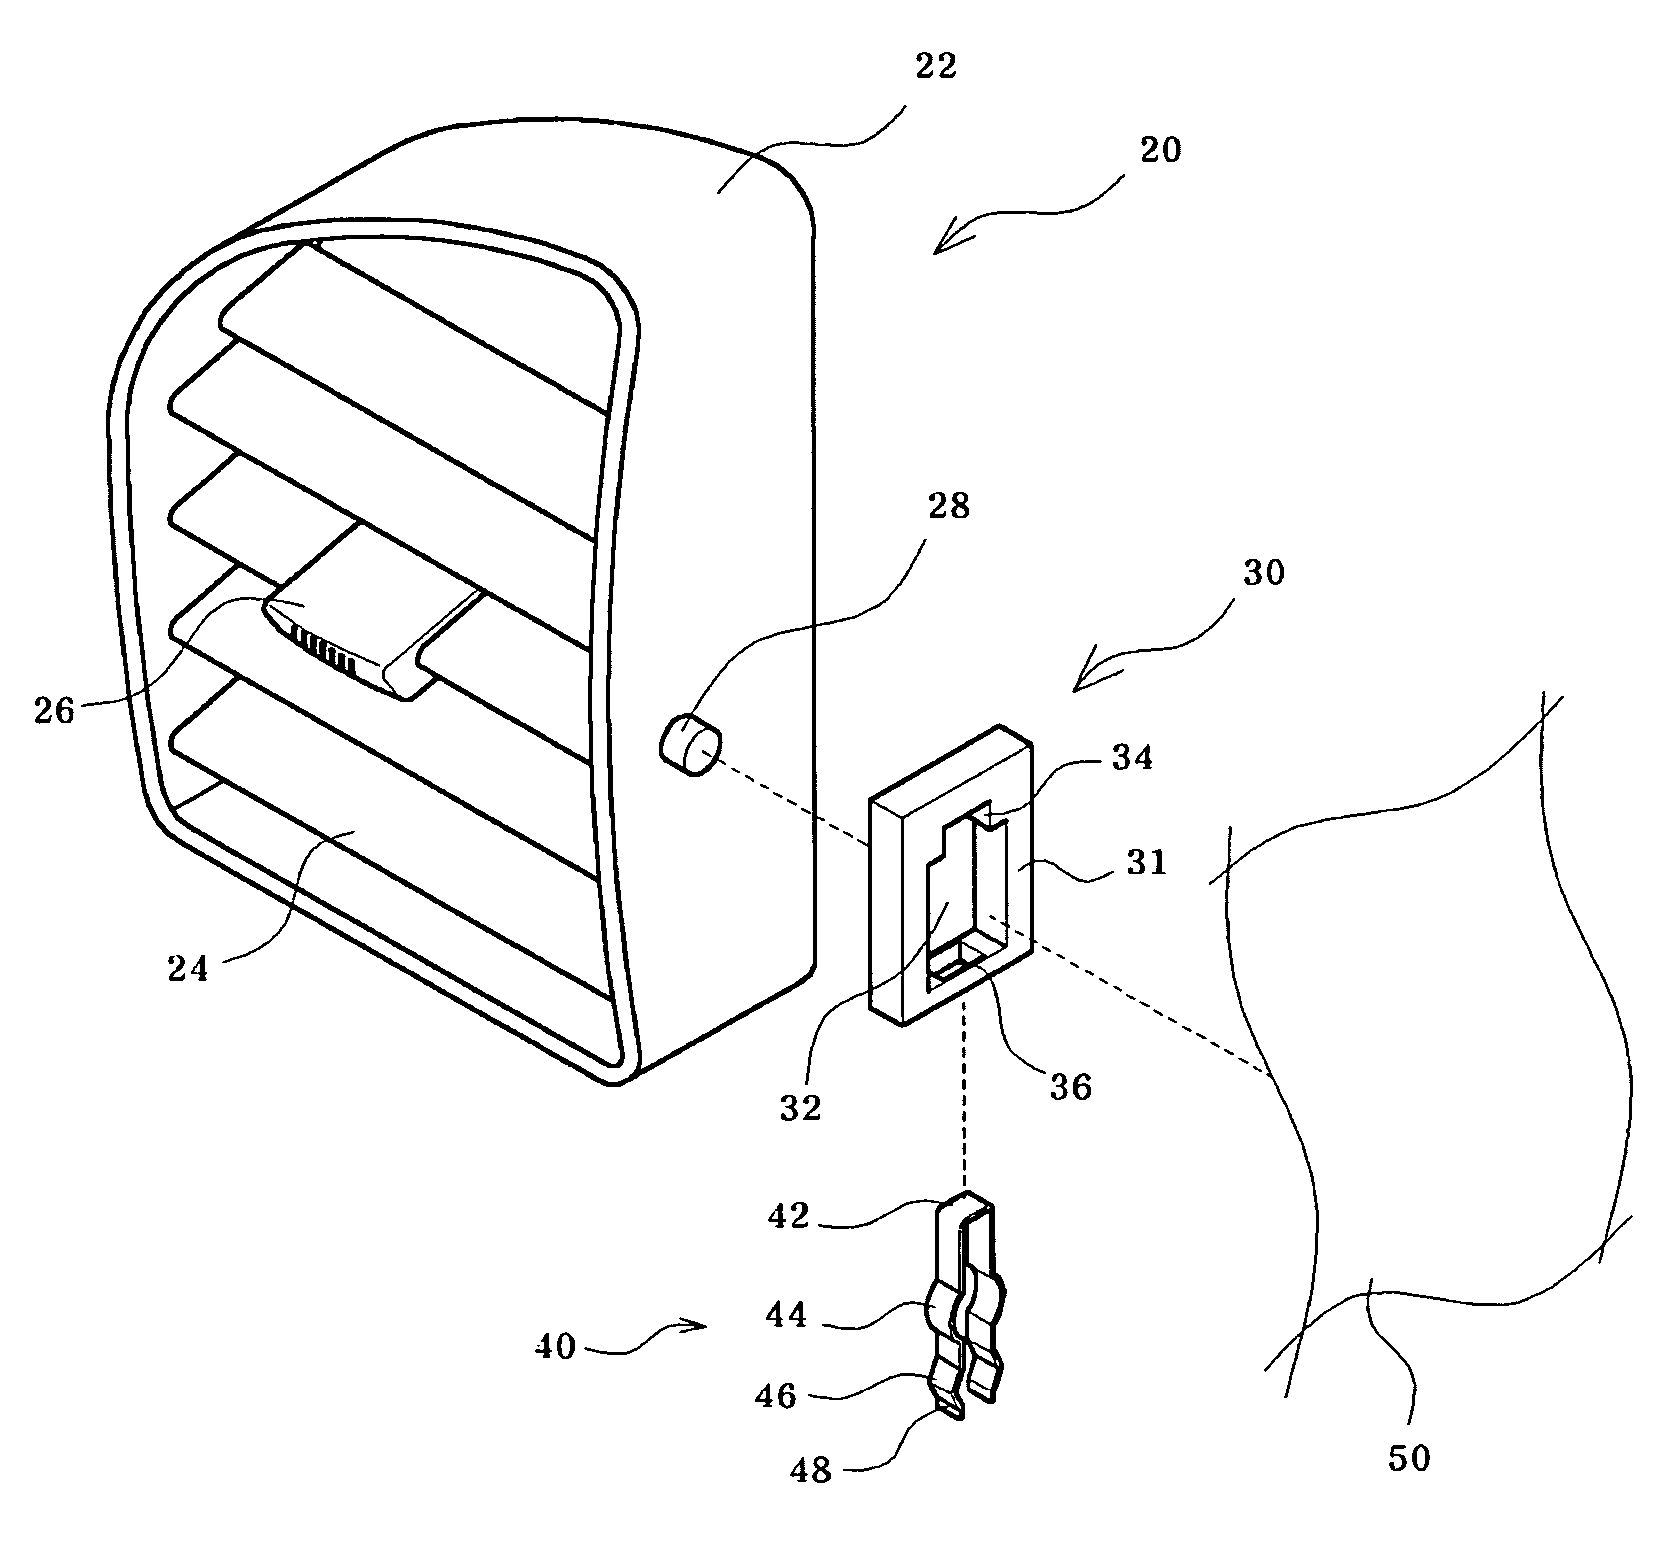 Hinge structure of an air vent grill